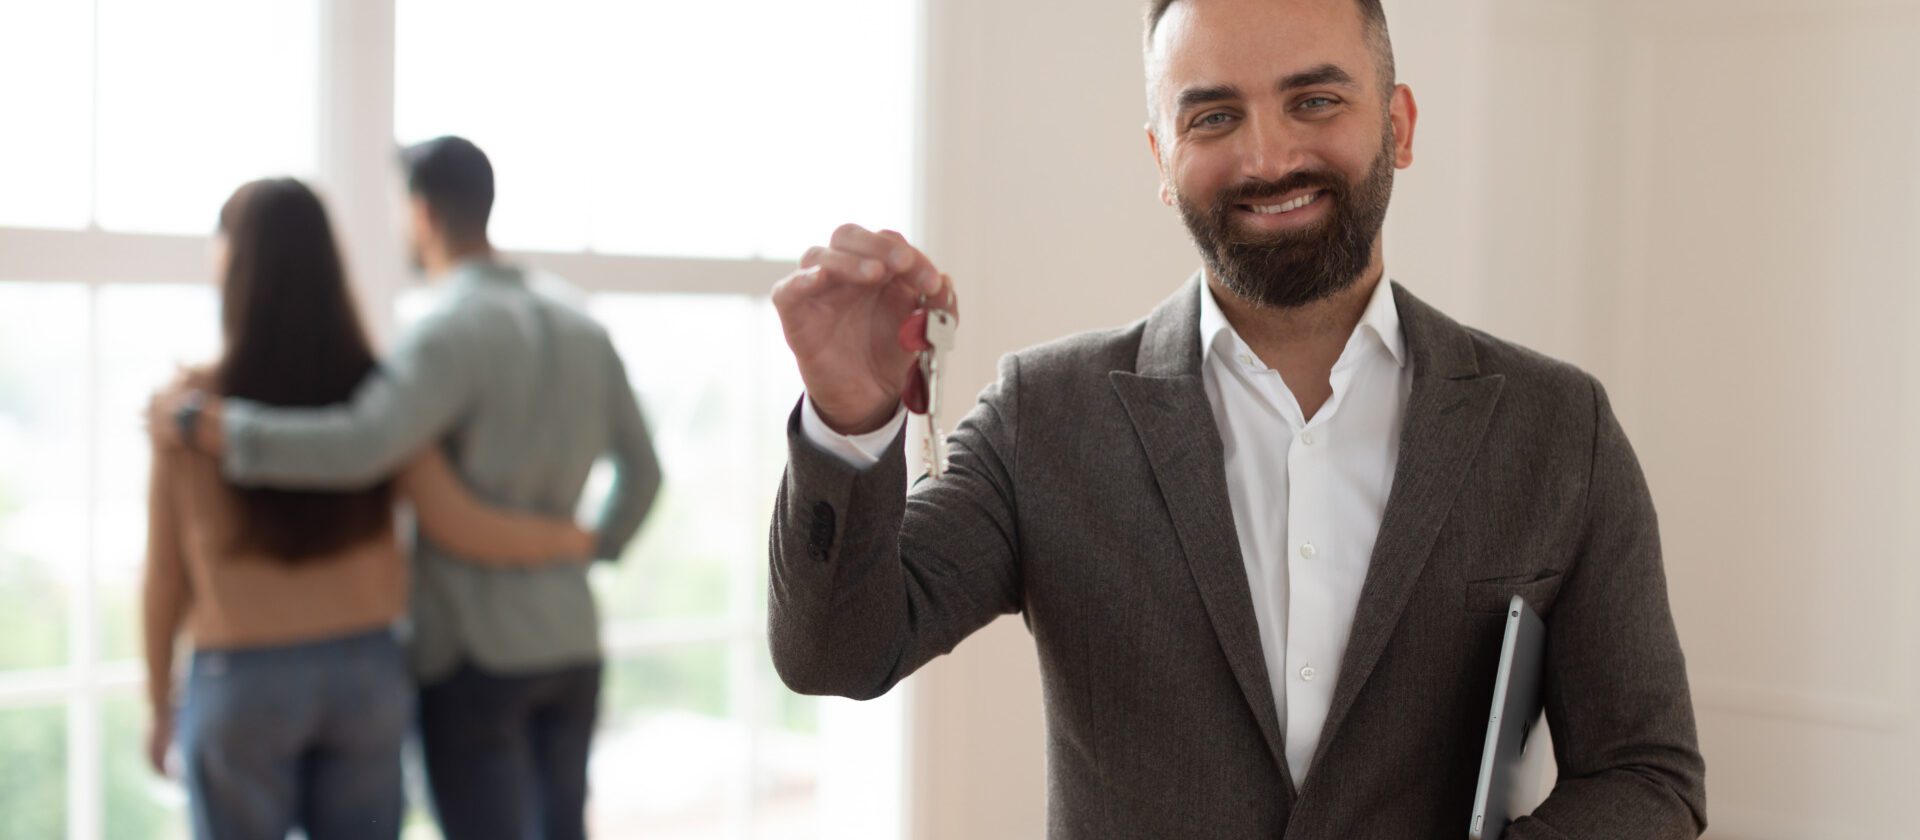 Portrait Of Smiling Real Estate Agent Holding And Showing Key